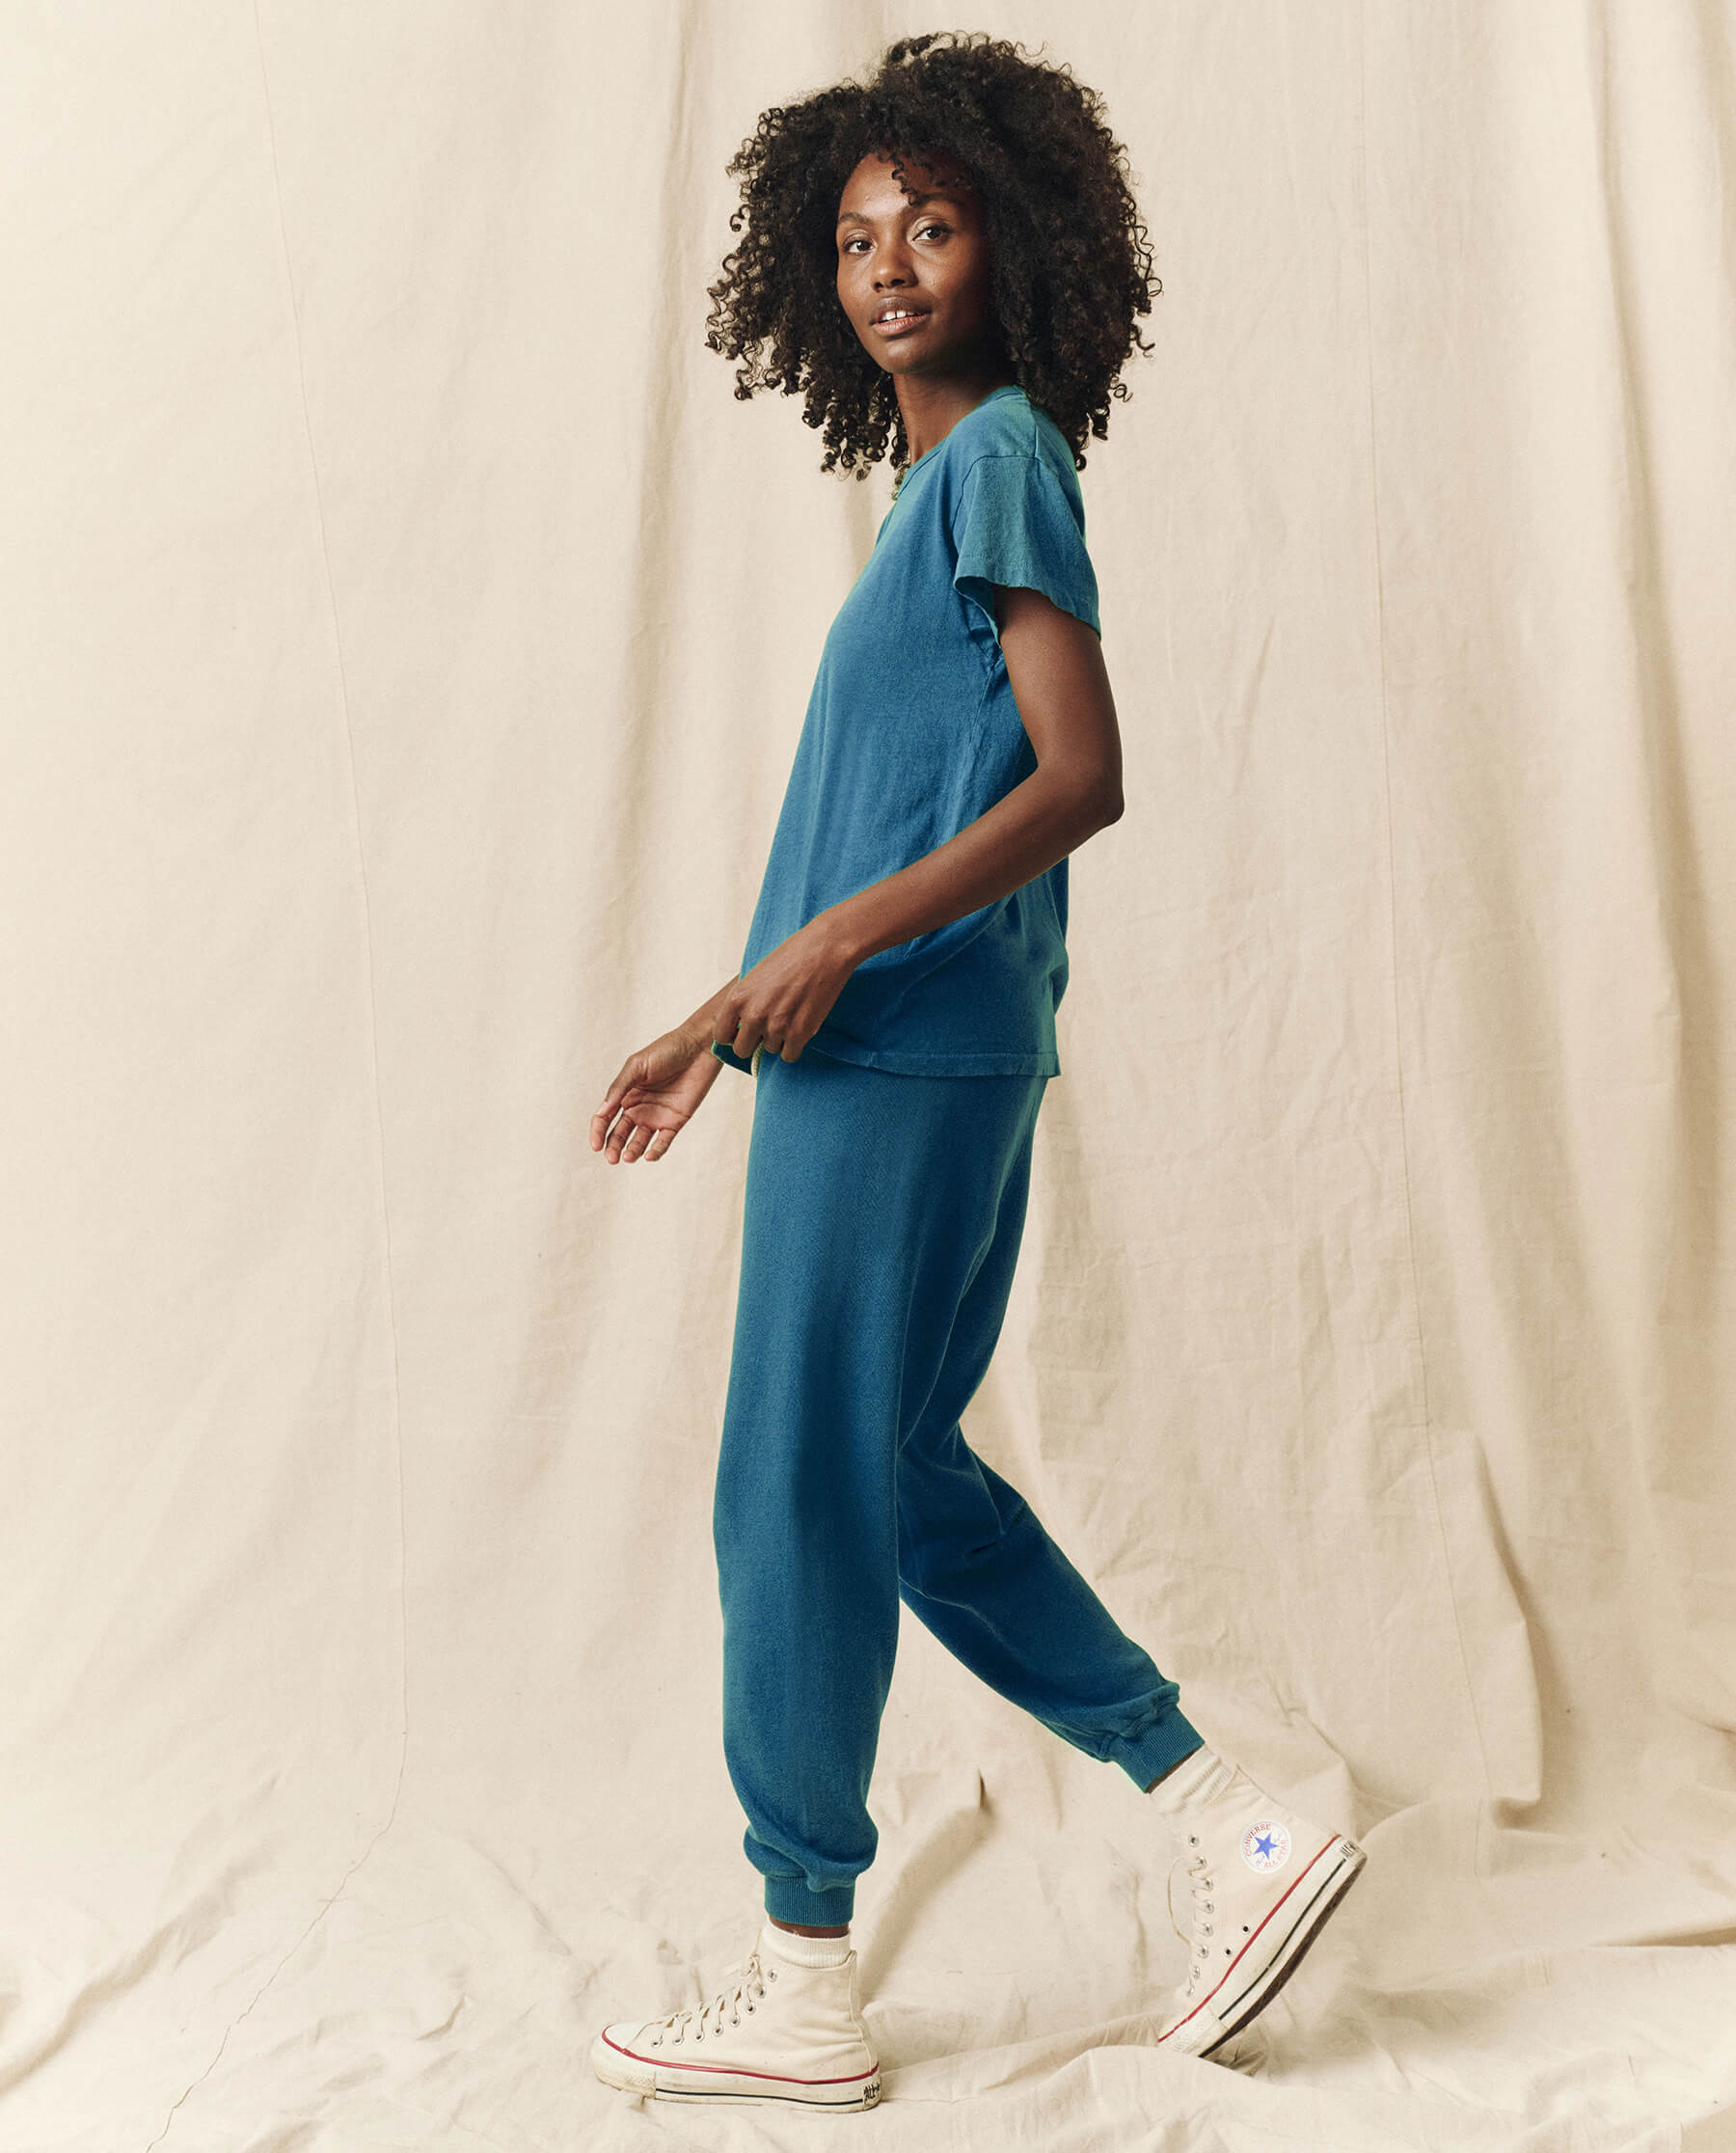 The Boxy Crew. Solid -- Glacier Blue TEES THE GREAT. HOL 23 KNITS